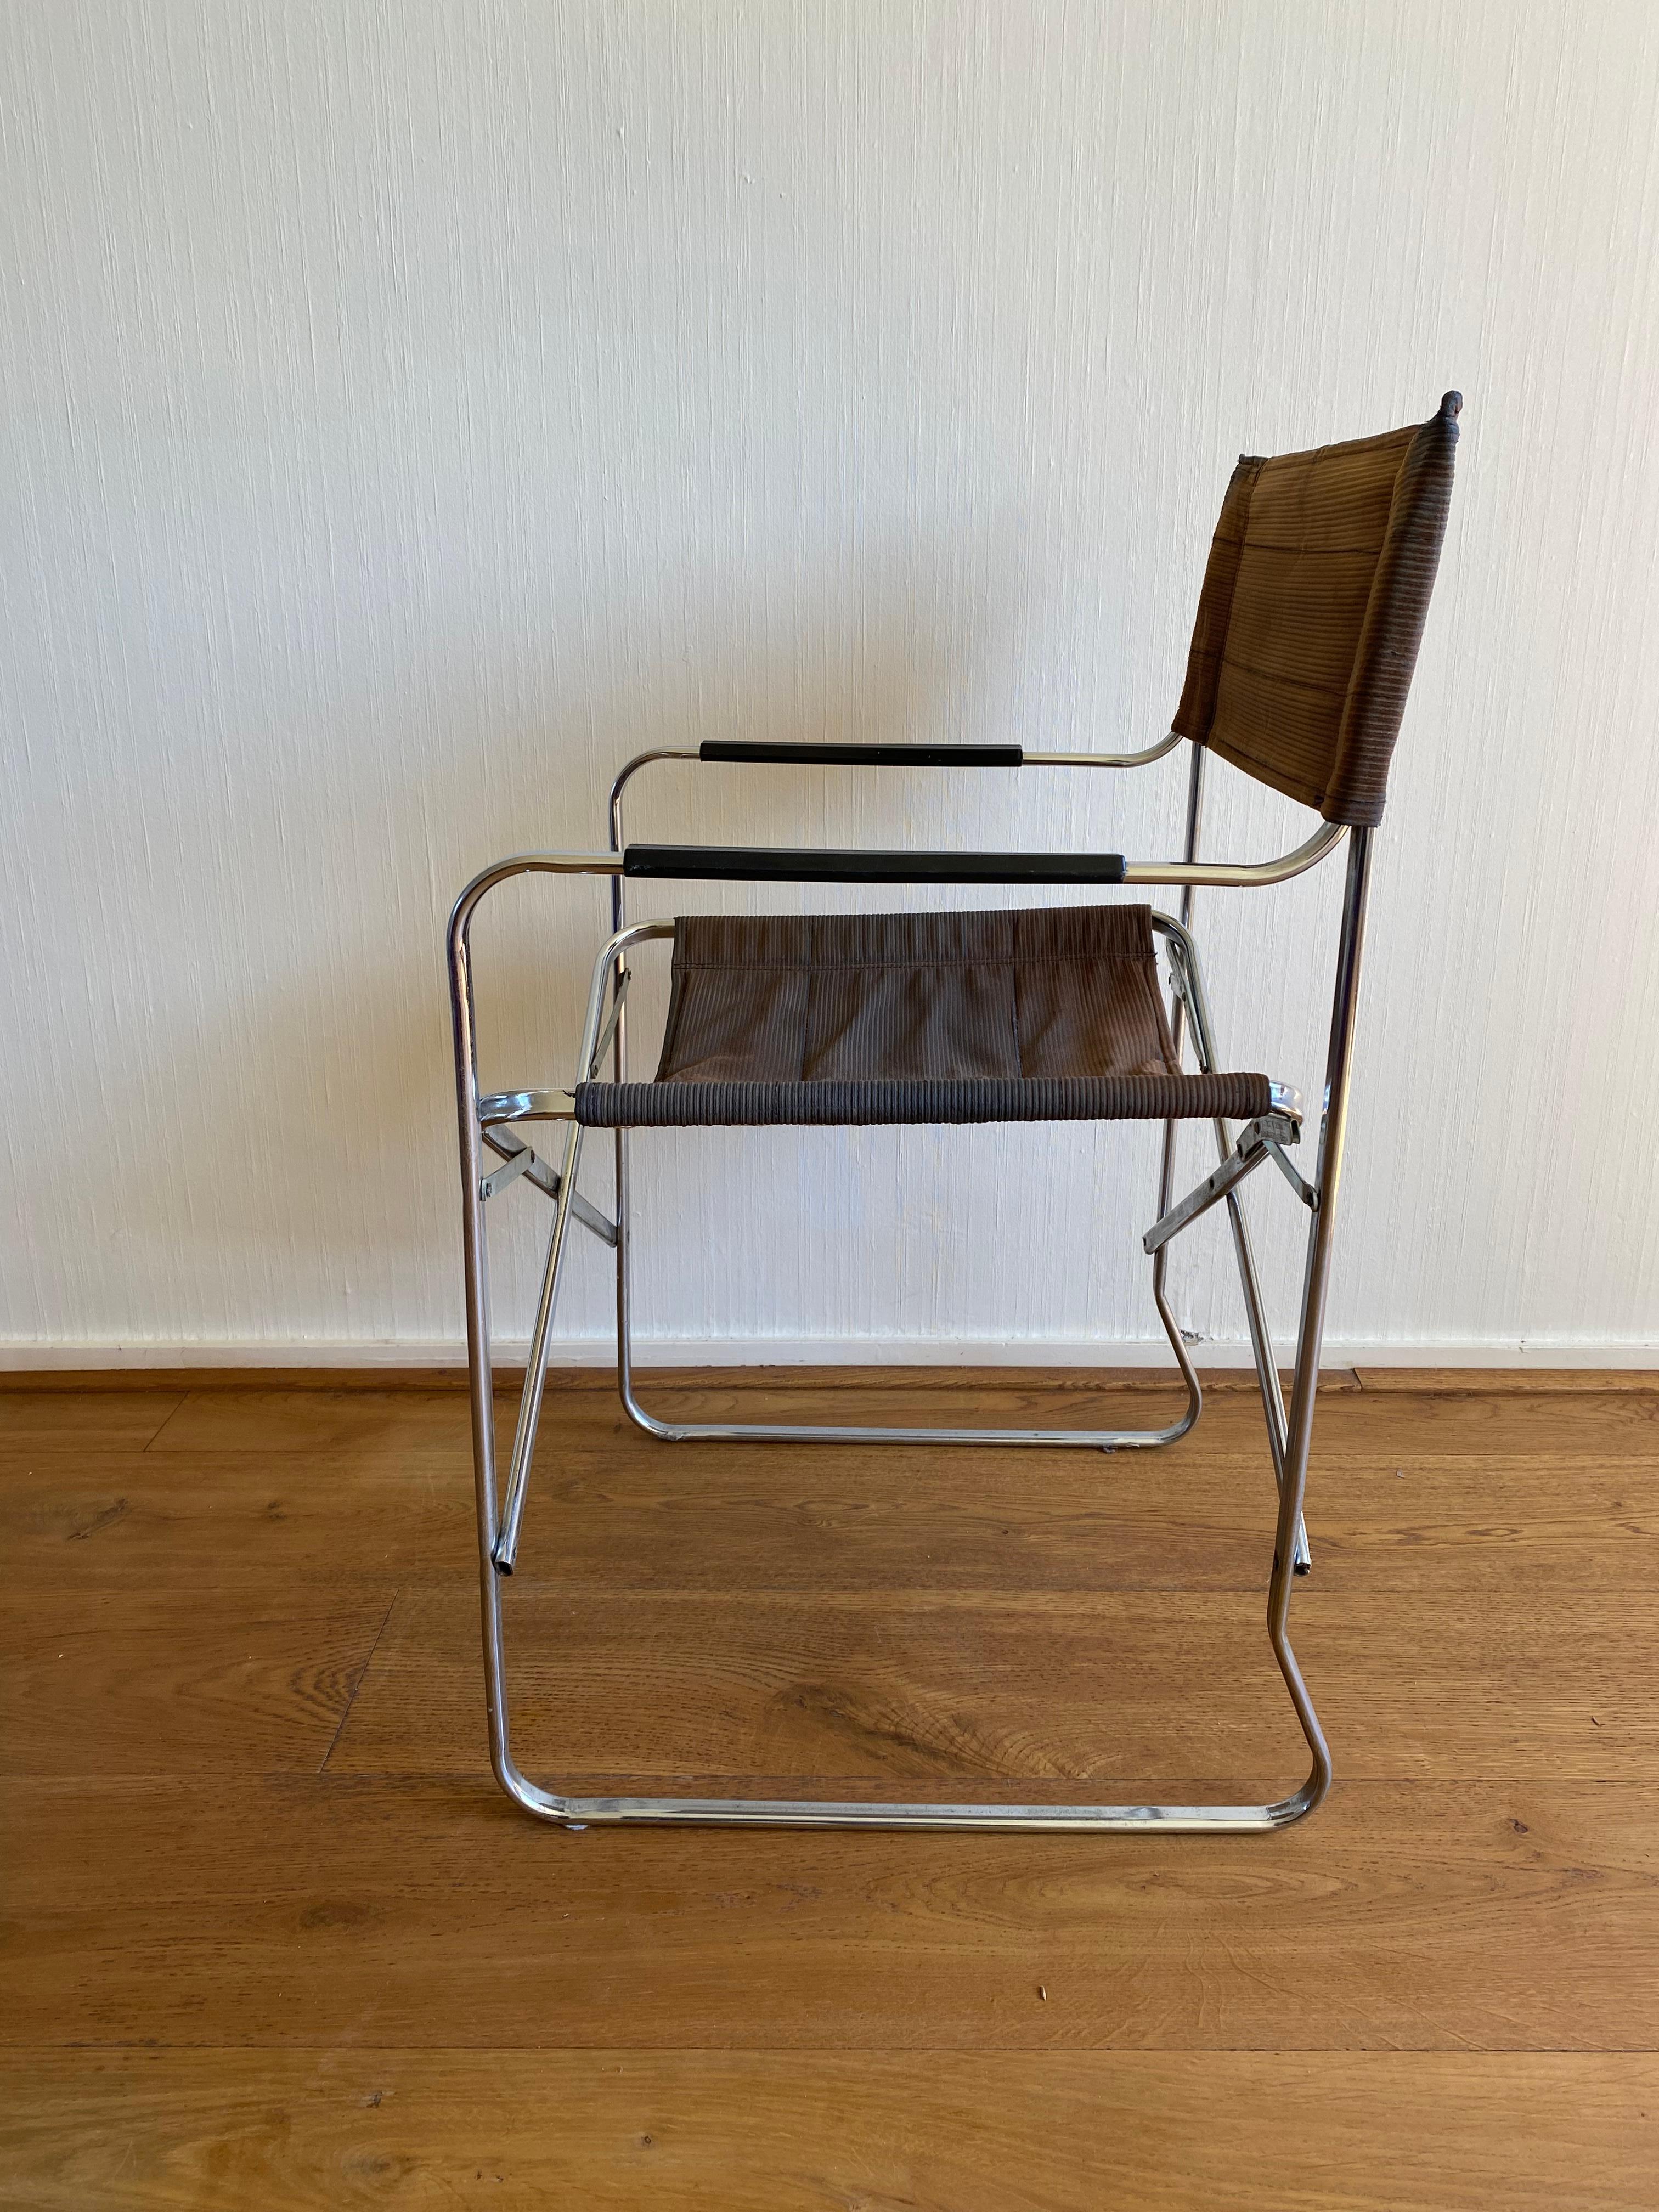 20th Century Mid-Century Modern Italian Folding Chair in Style of the Gae Aulenti April Chair For Sale